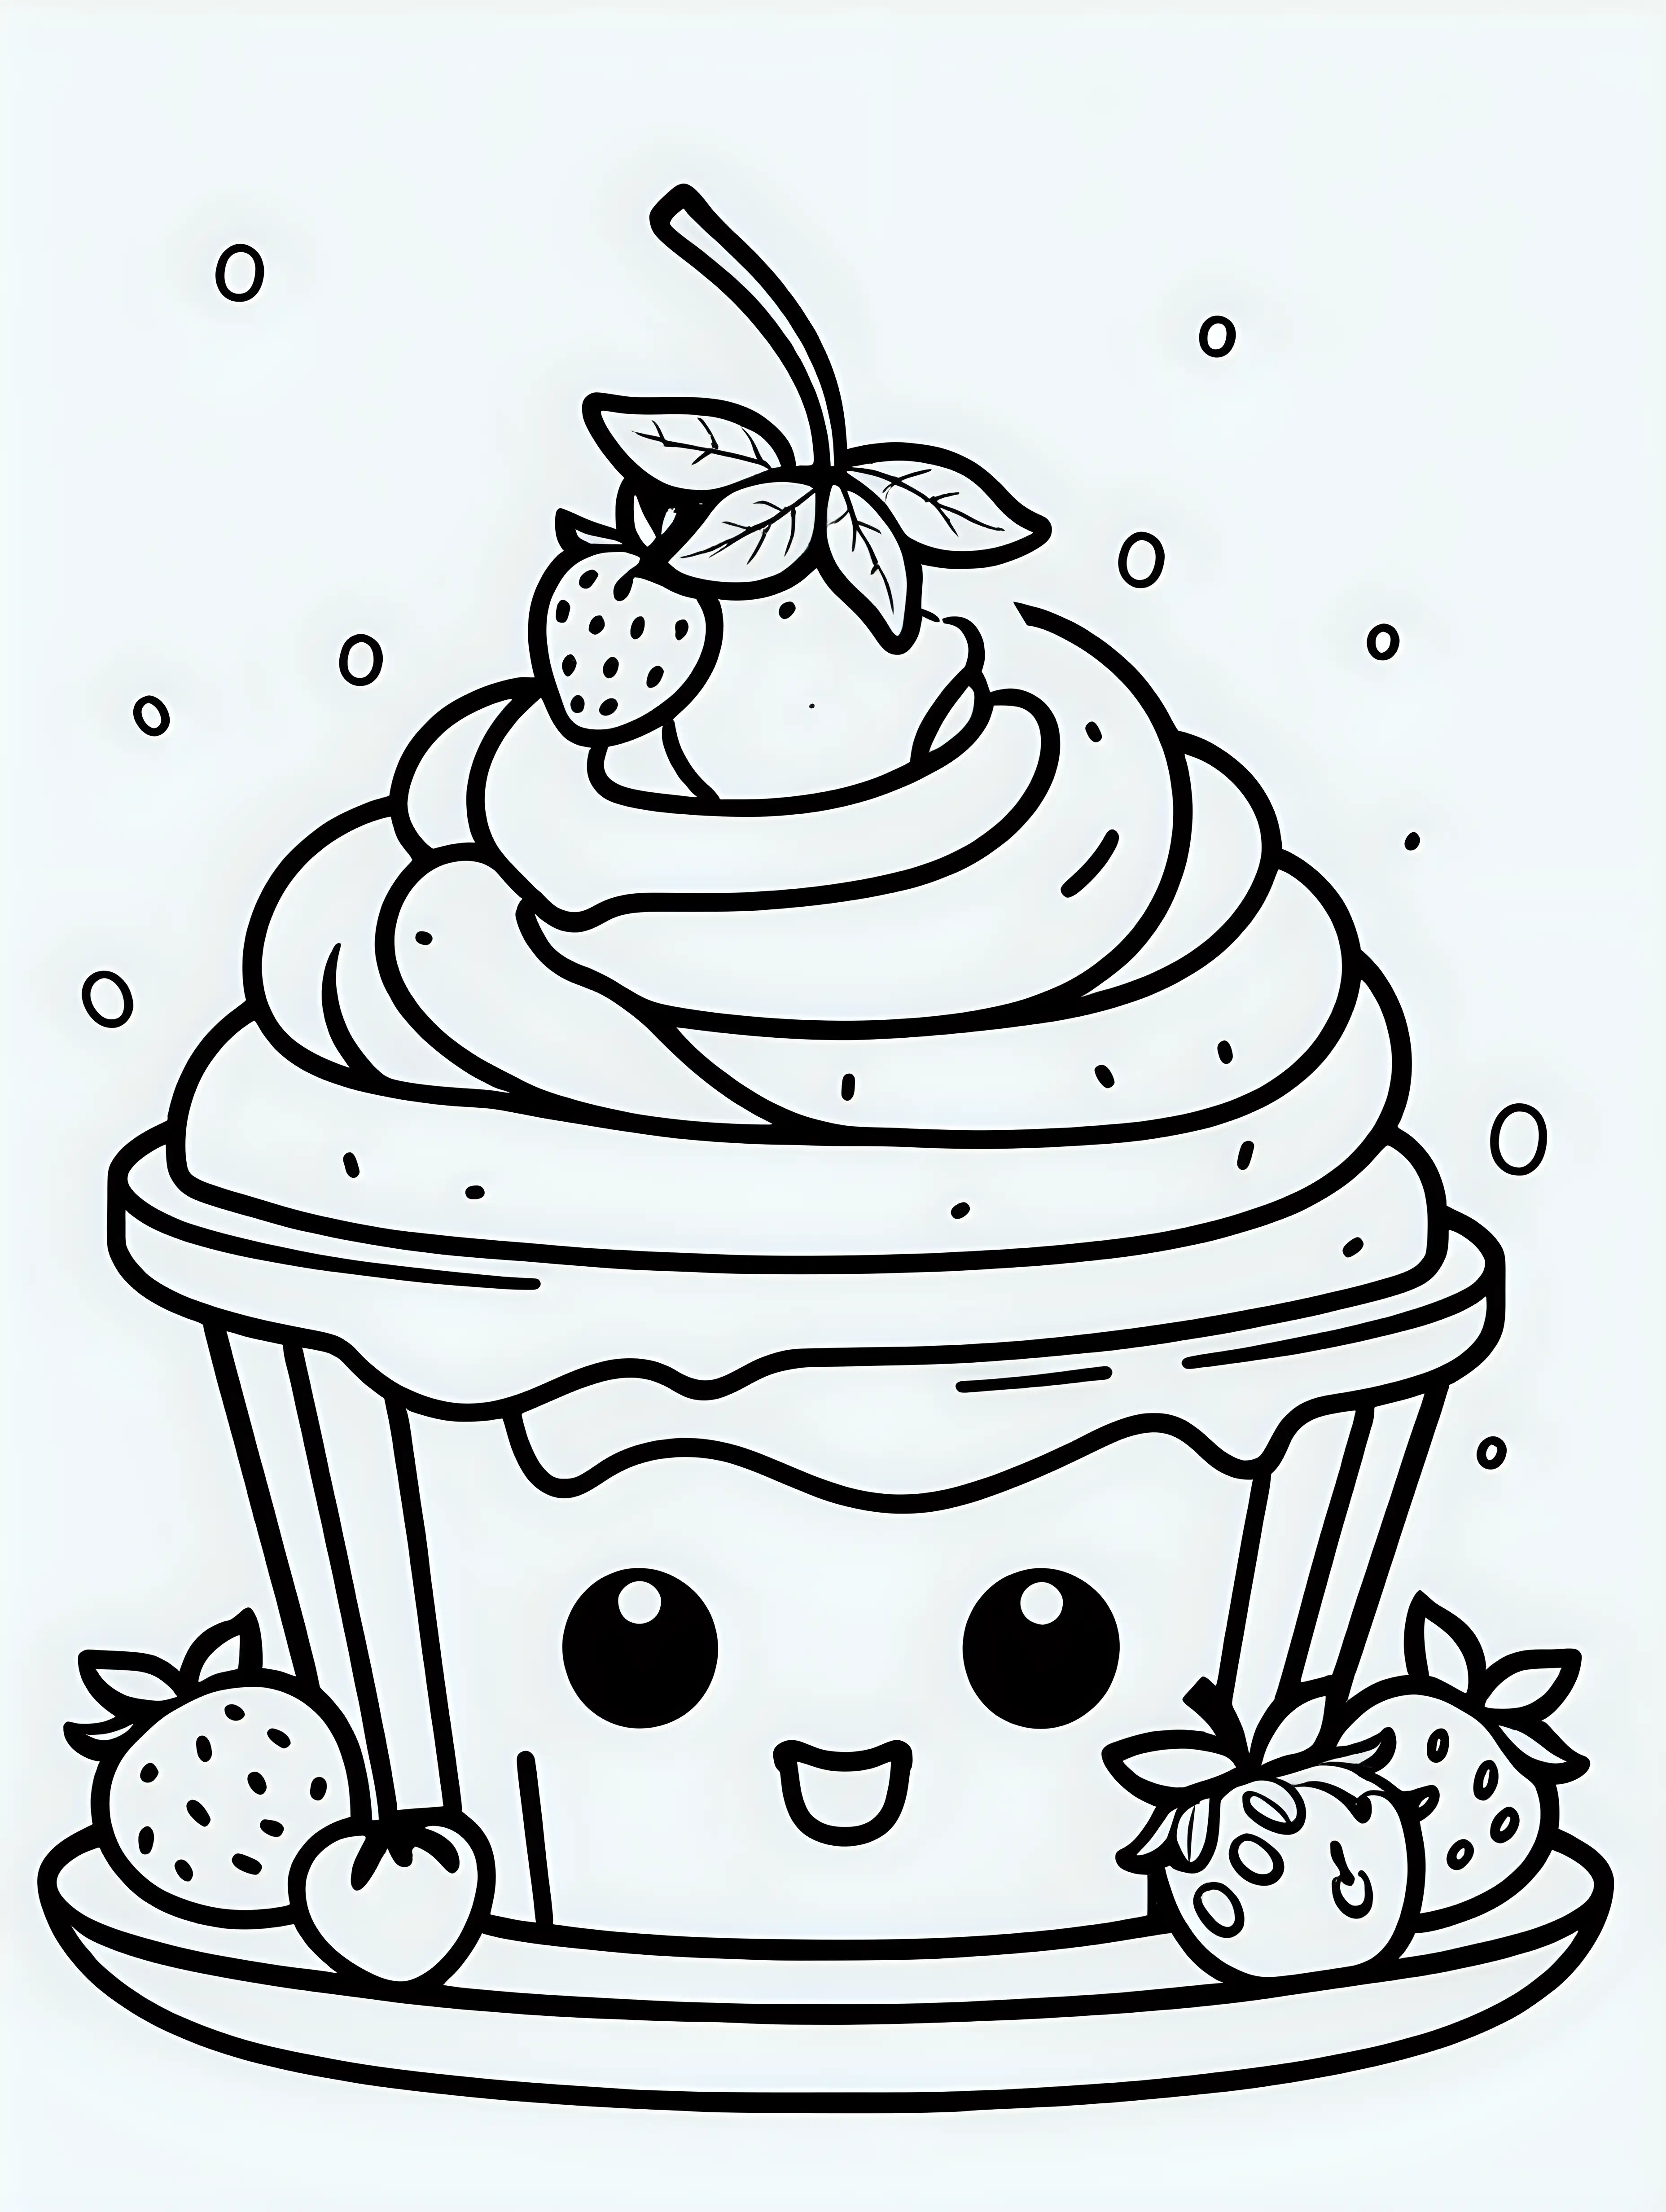 coloring book, cartoon drawing, clean black and white, single line, white background, large cute dessert with berries, emoji